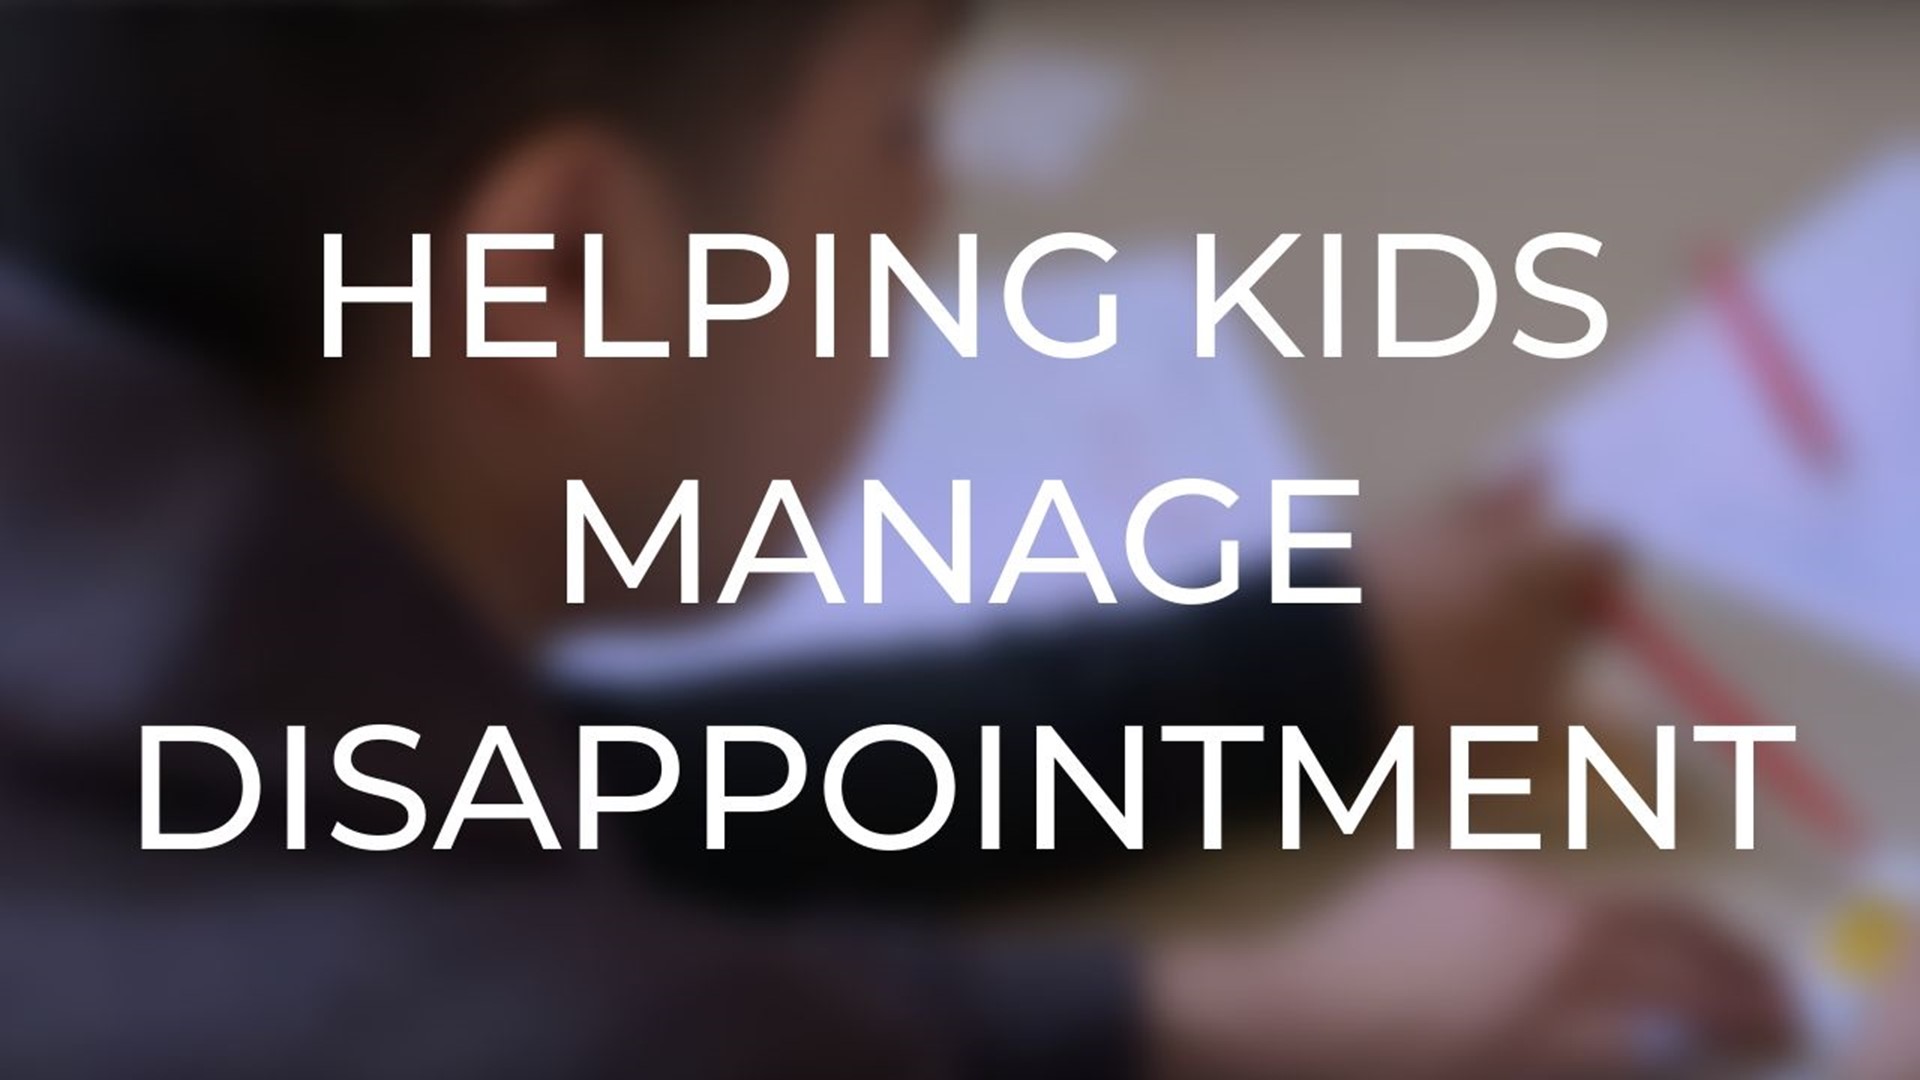 How parents can help their kids manage disappointment.